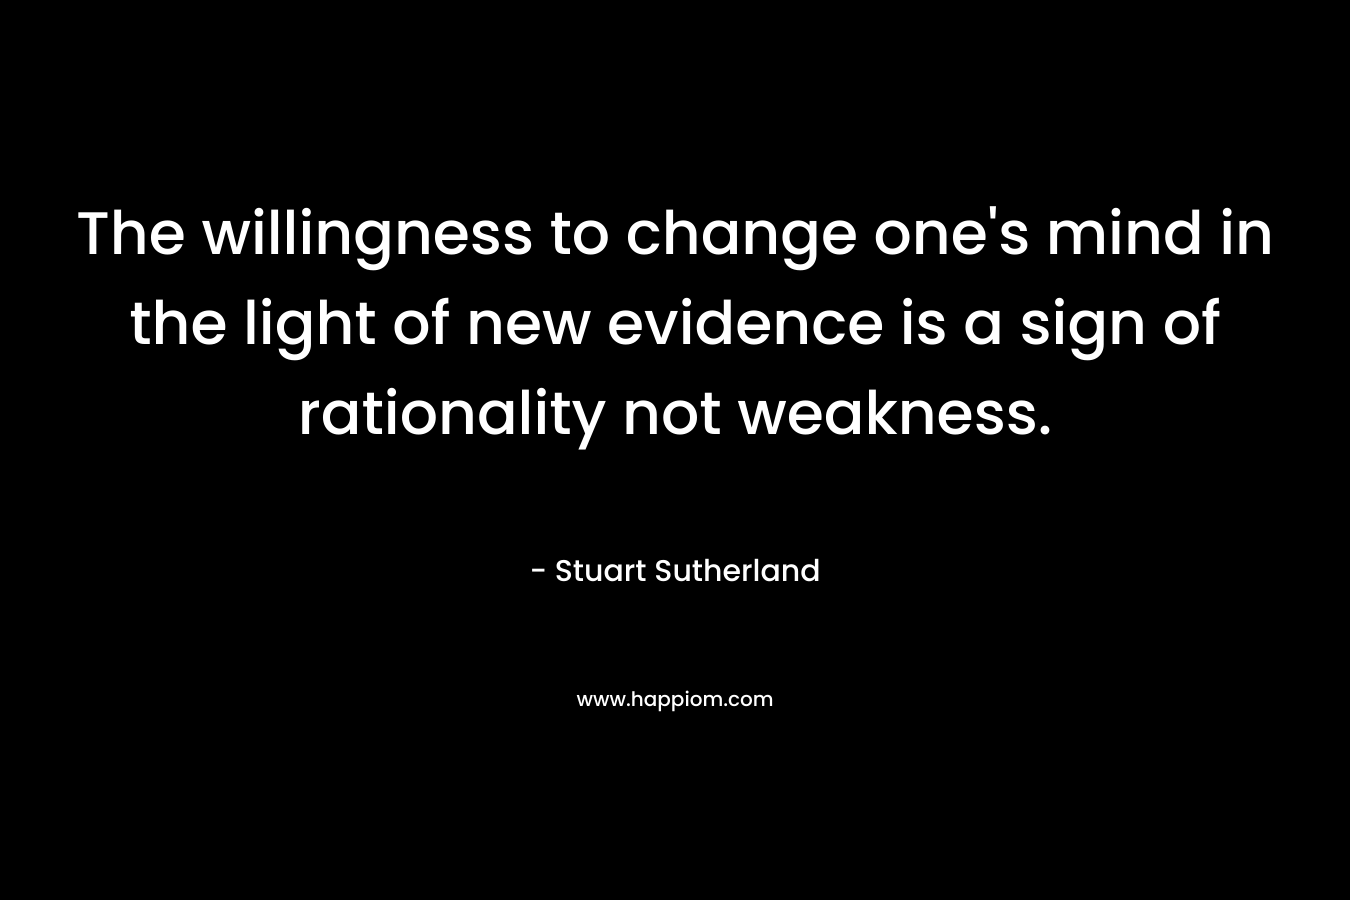 The willingness to change one's mind in the light of new evidence is a sign of rationality not weakness.